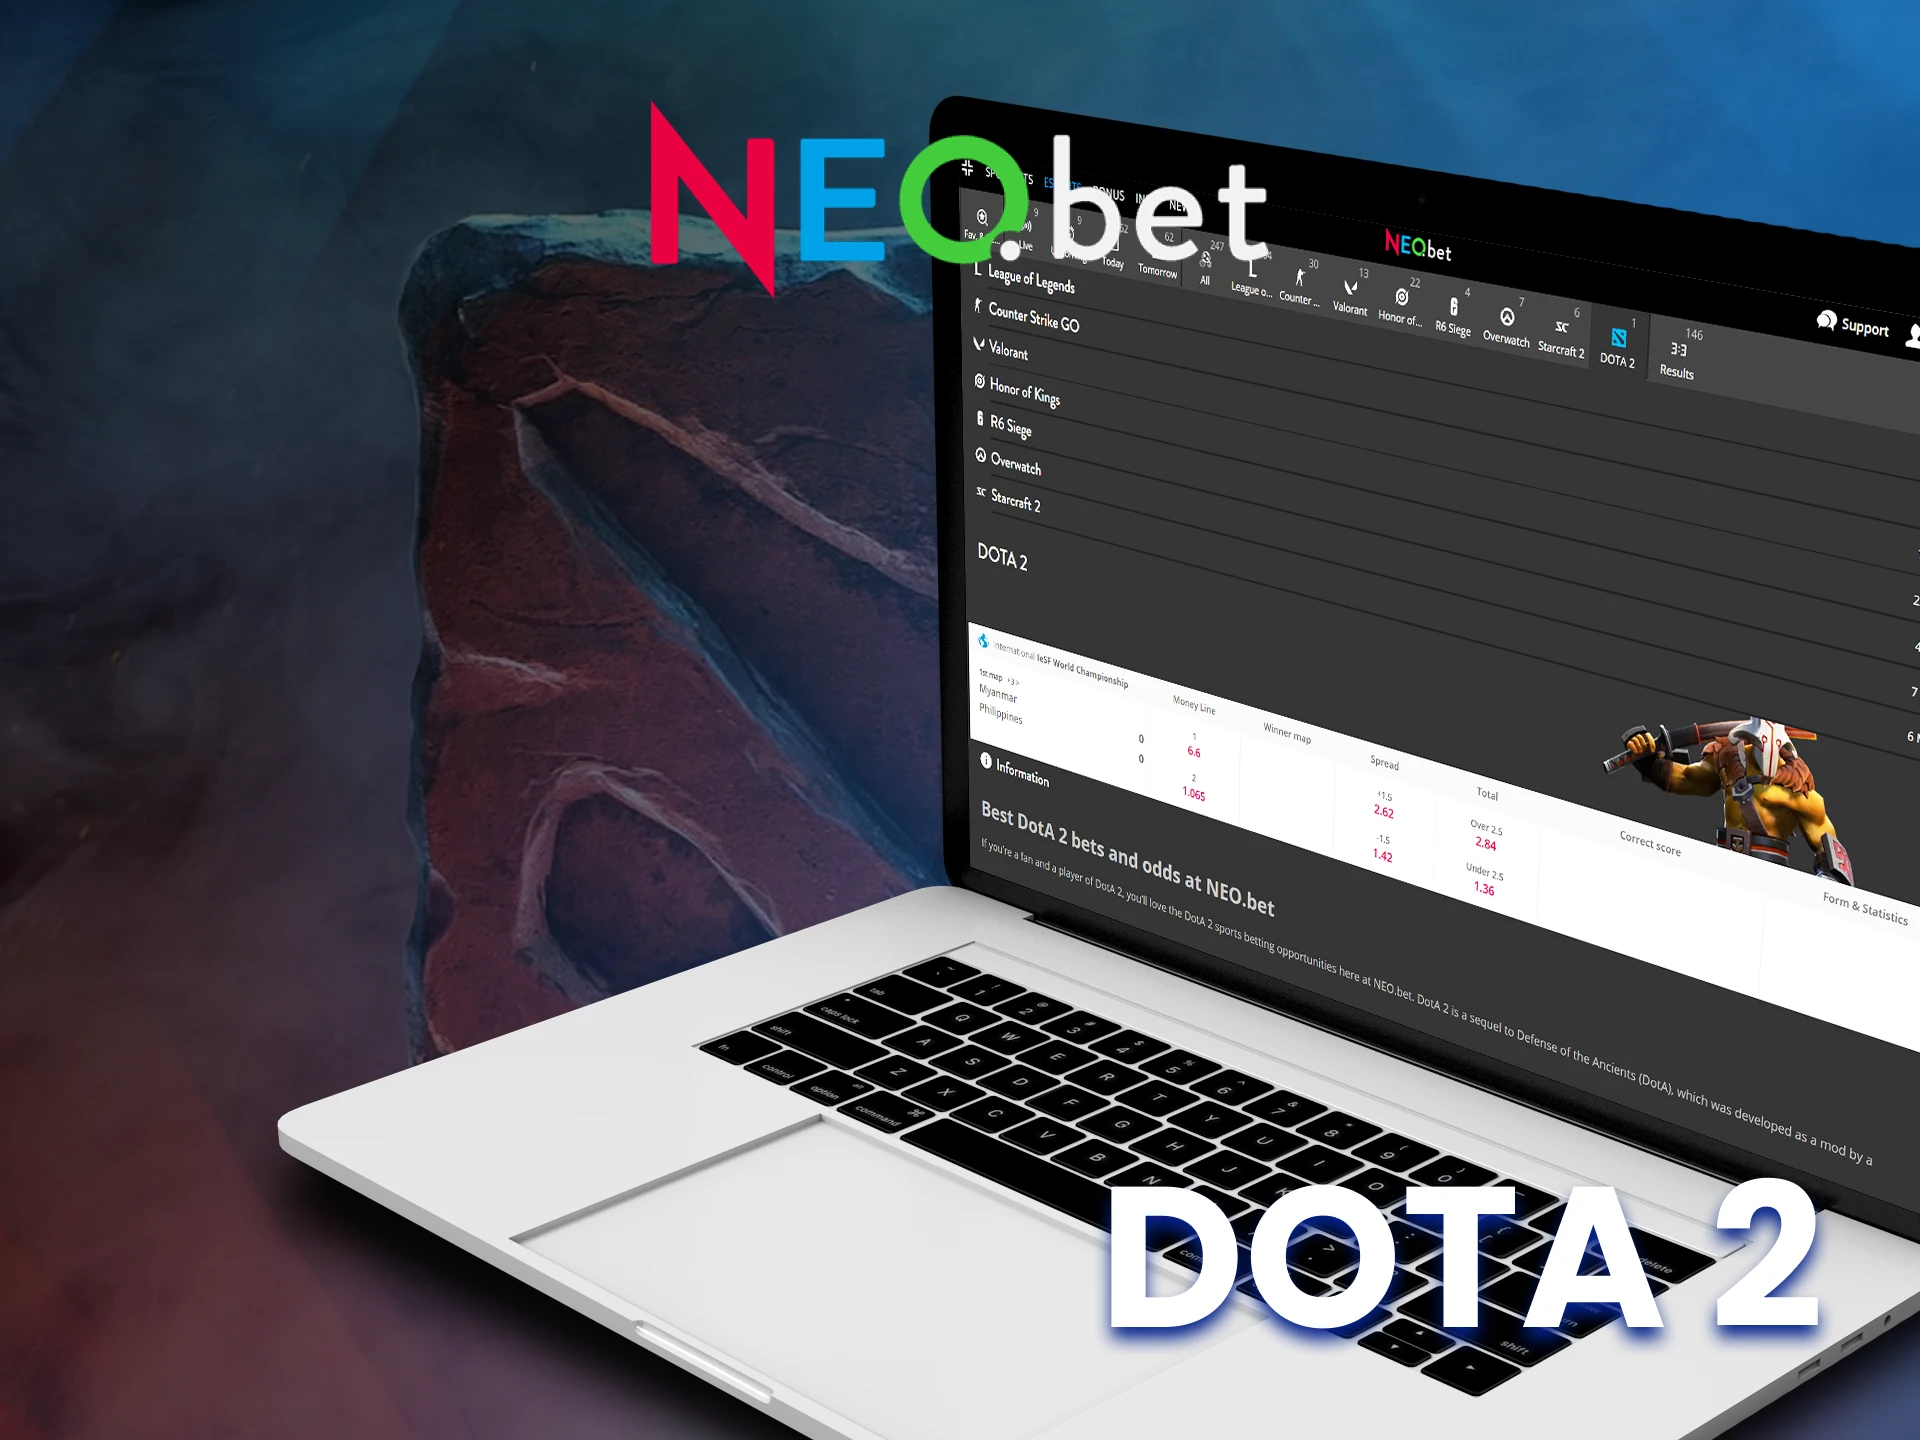 Place your bets on Dota 2 at NEO.bet.